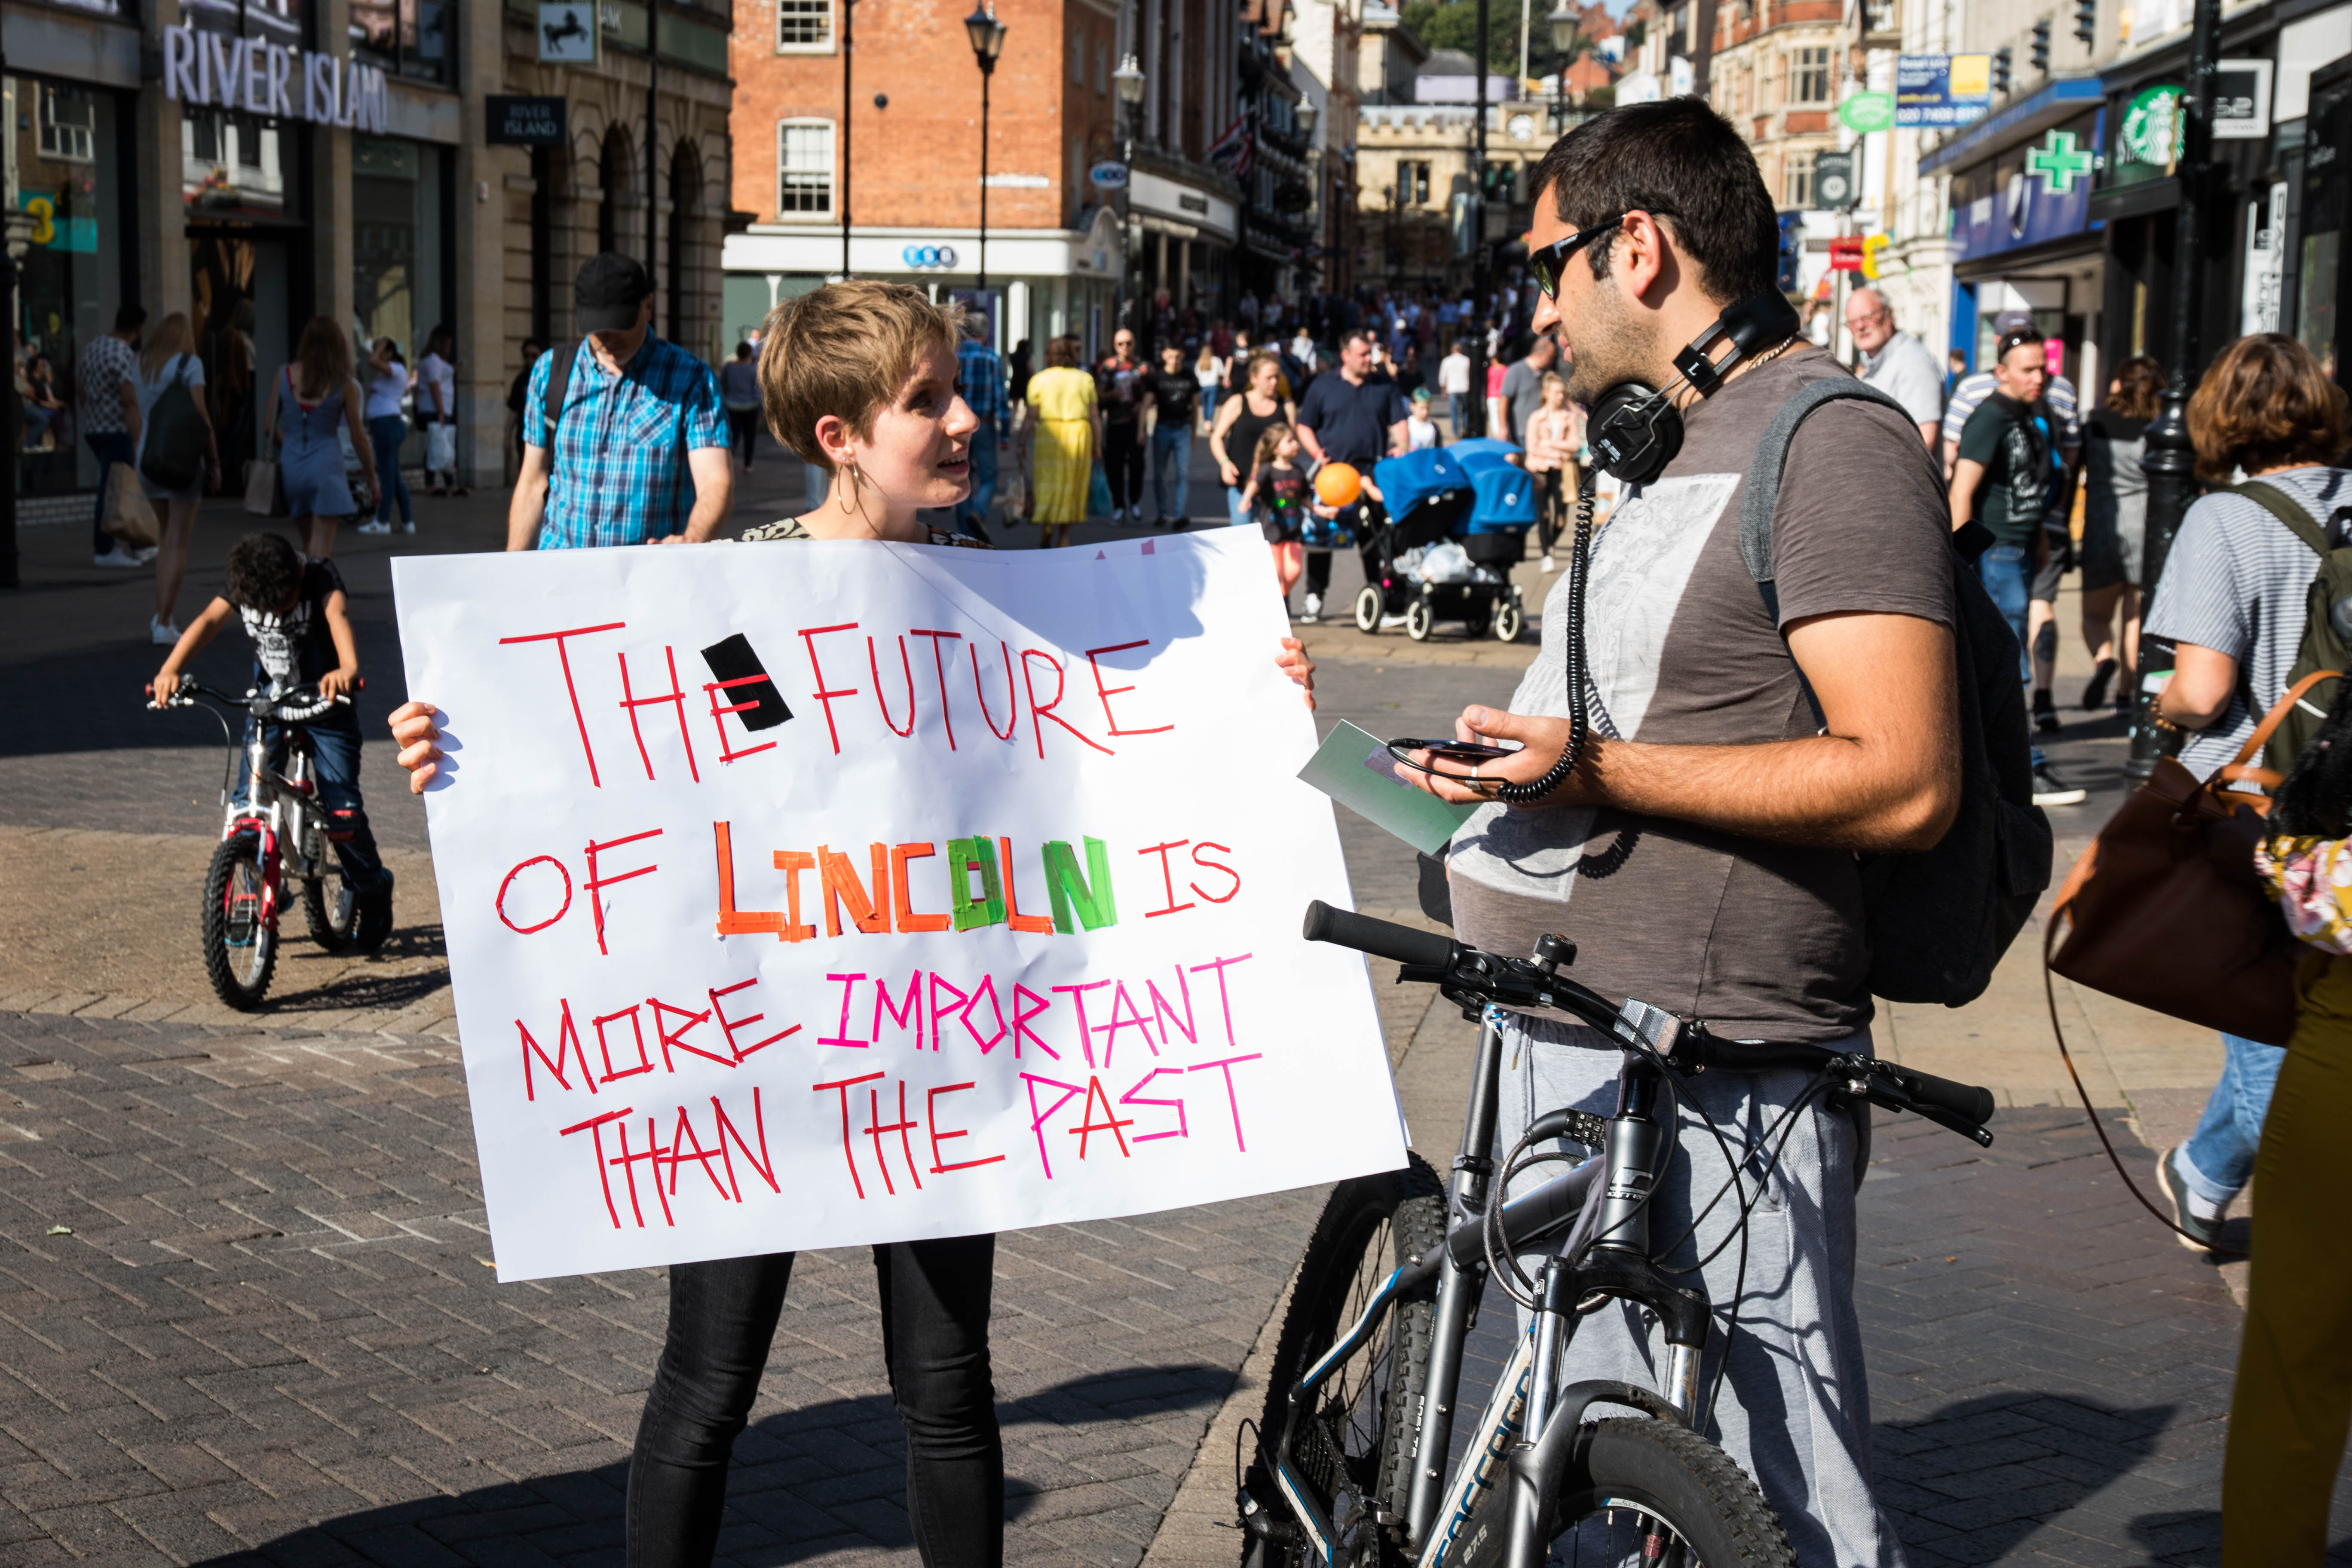 In the street a young woman holds a sign up as she talks to a man with a bicycle. It reads The future of lincoln is more important than the past.